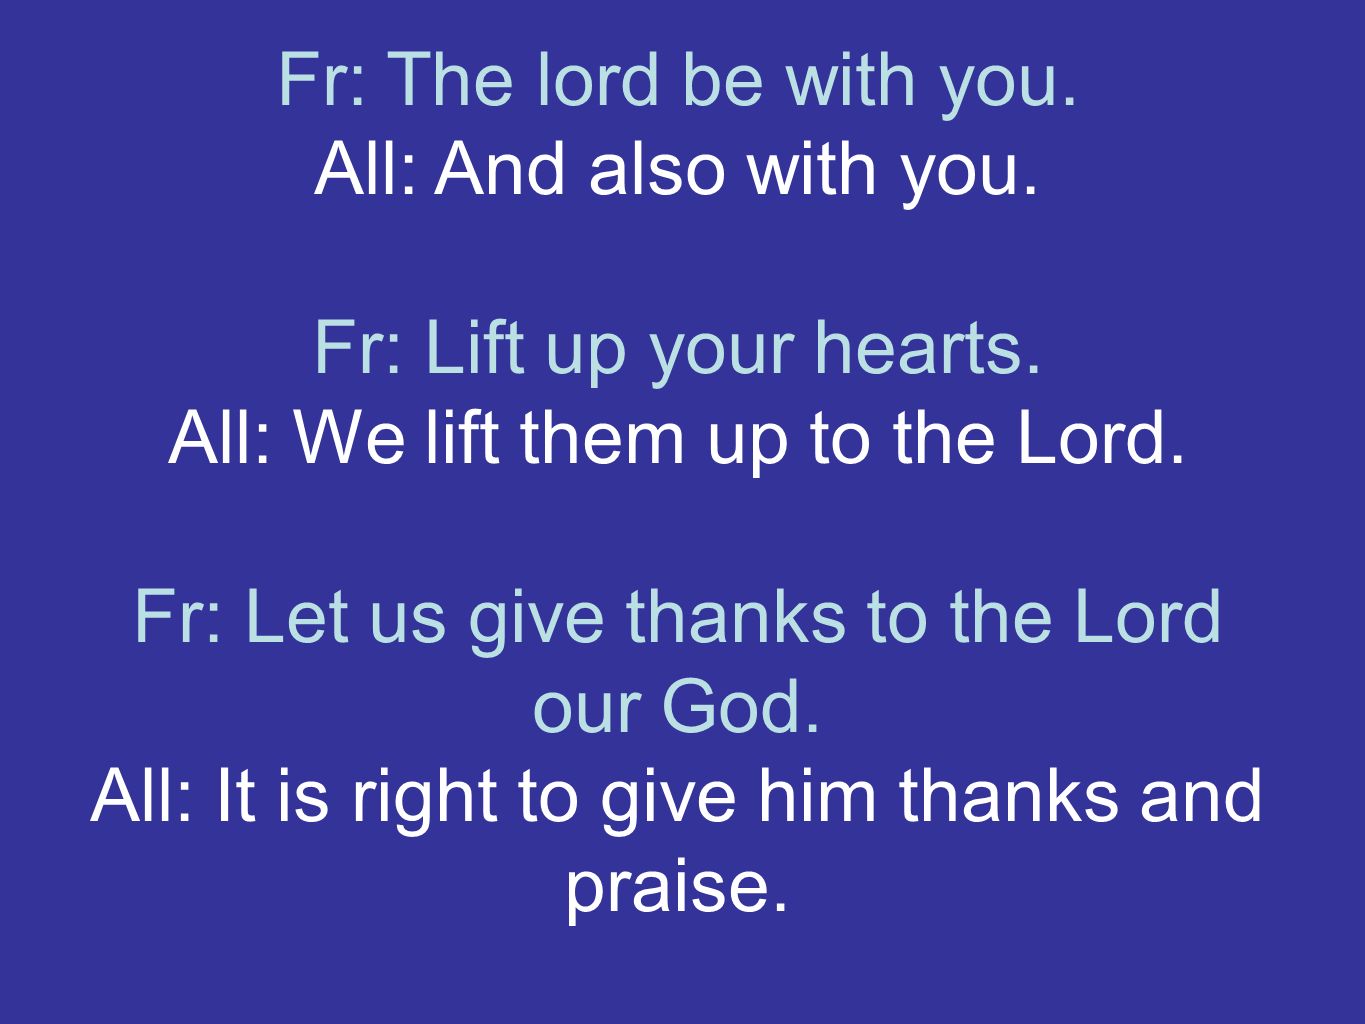 Fr: The lord be with you. All: And also with you.